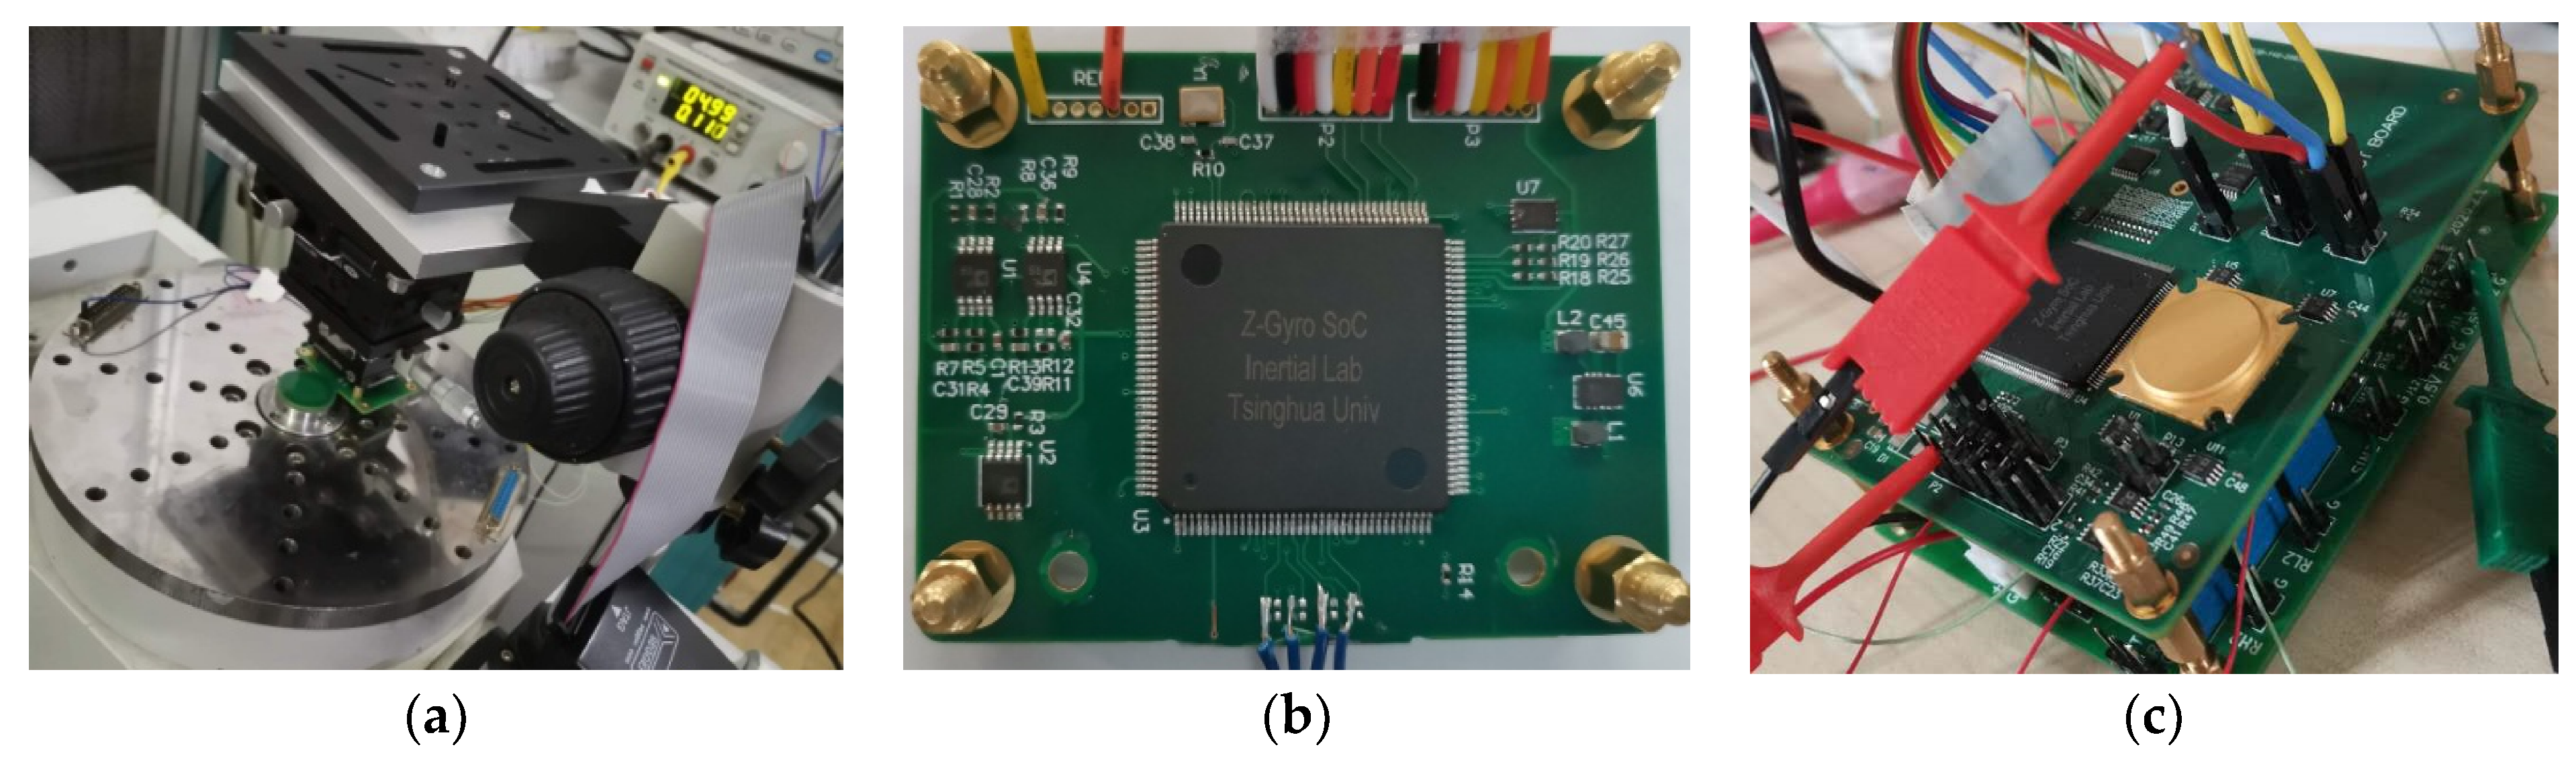 Sensors | Free Full-Text | A Digital-Analog Hybrid System-on-Chip for  Capacitive Sensor Measurement and Control | HTML